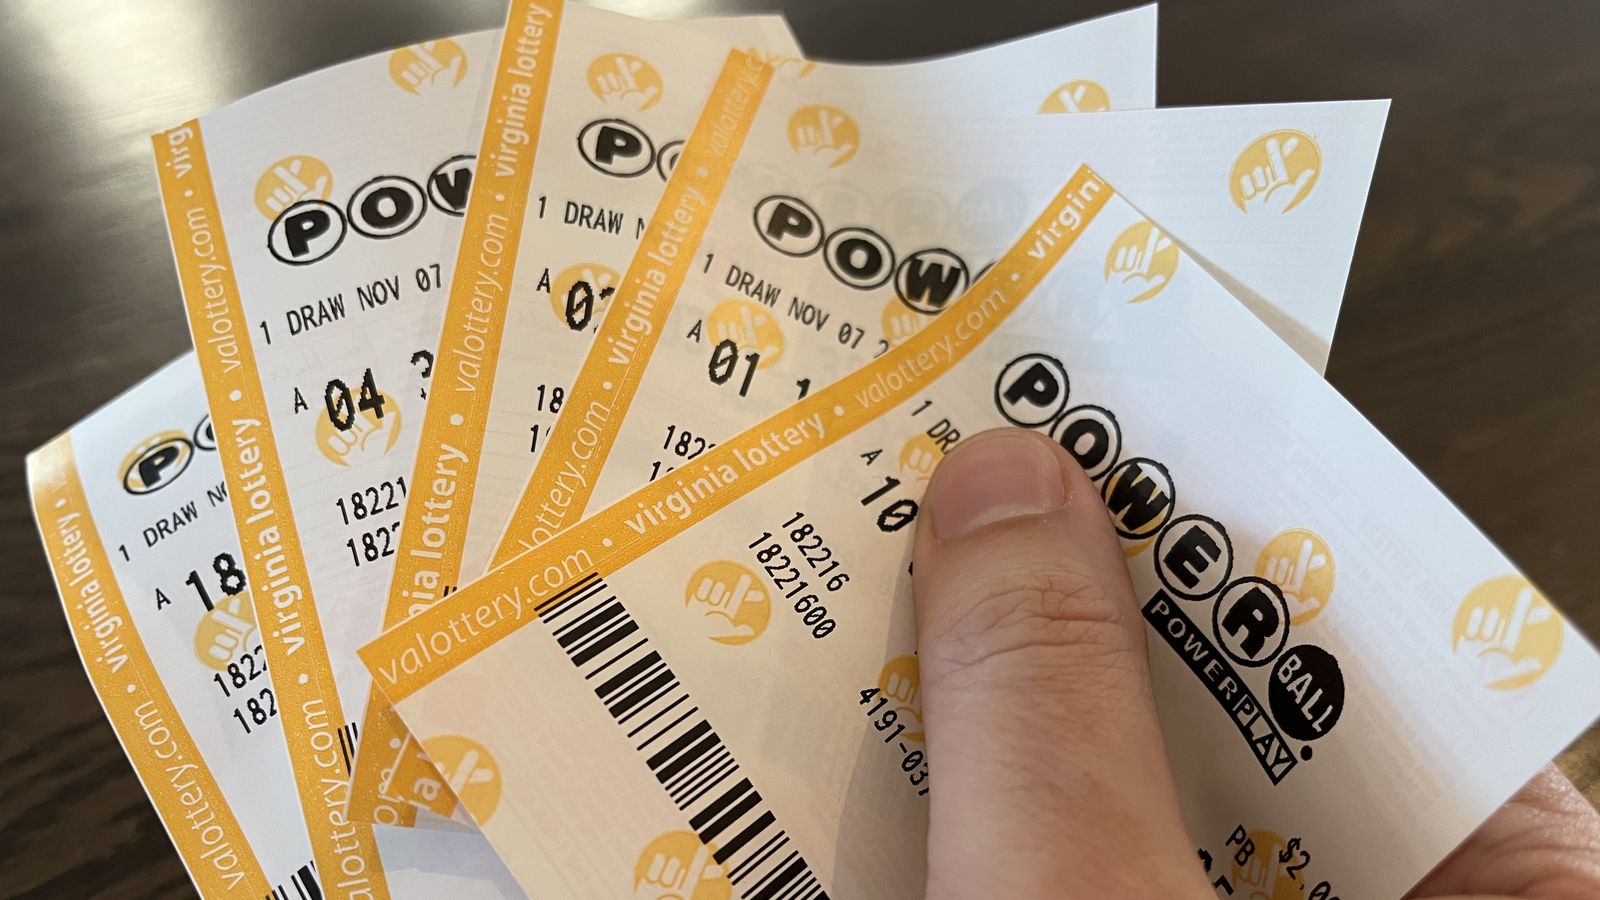 Officials announce where $2-million Powerball ticket was sold in